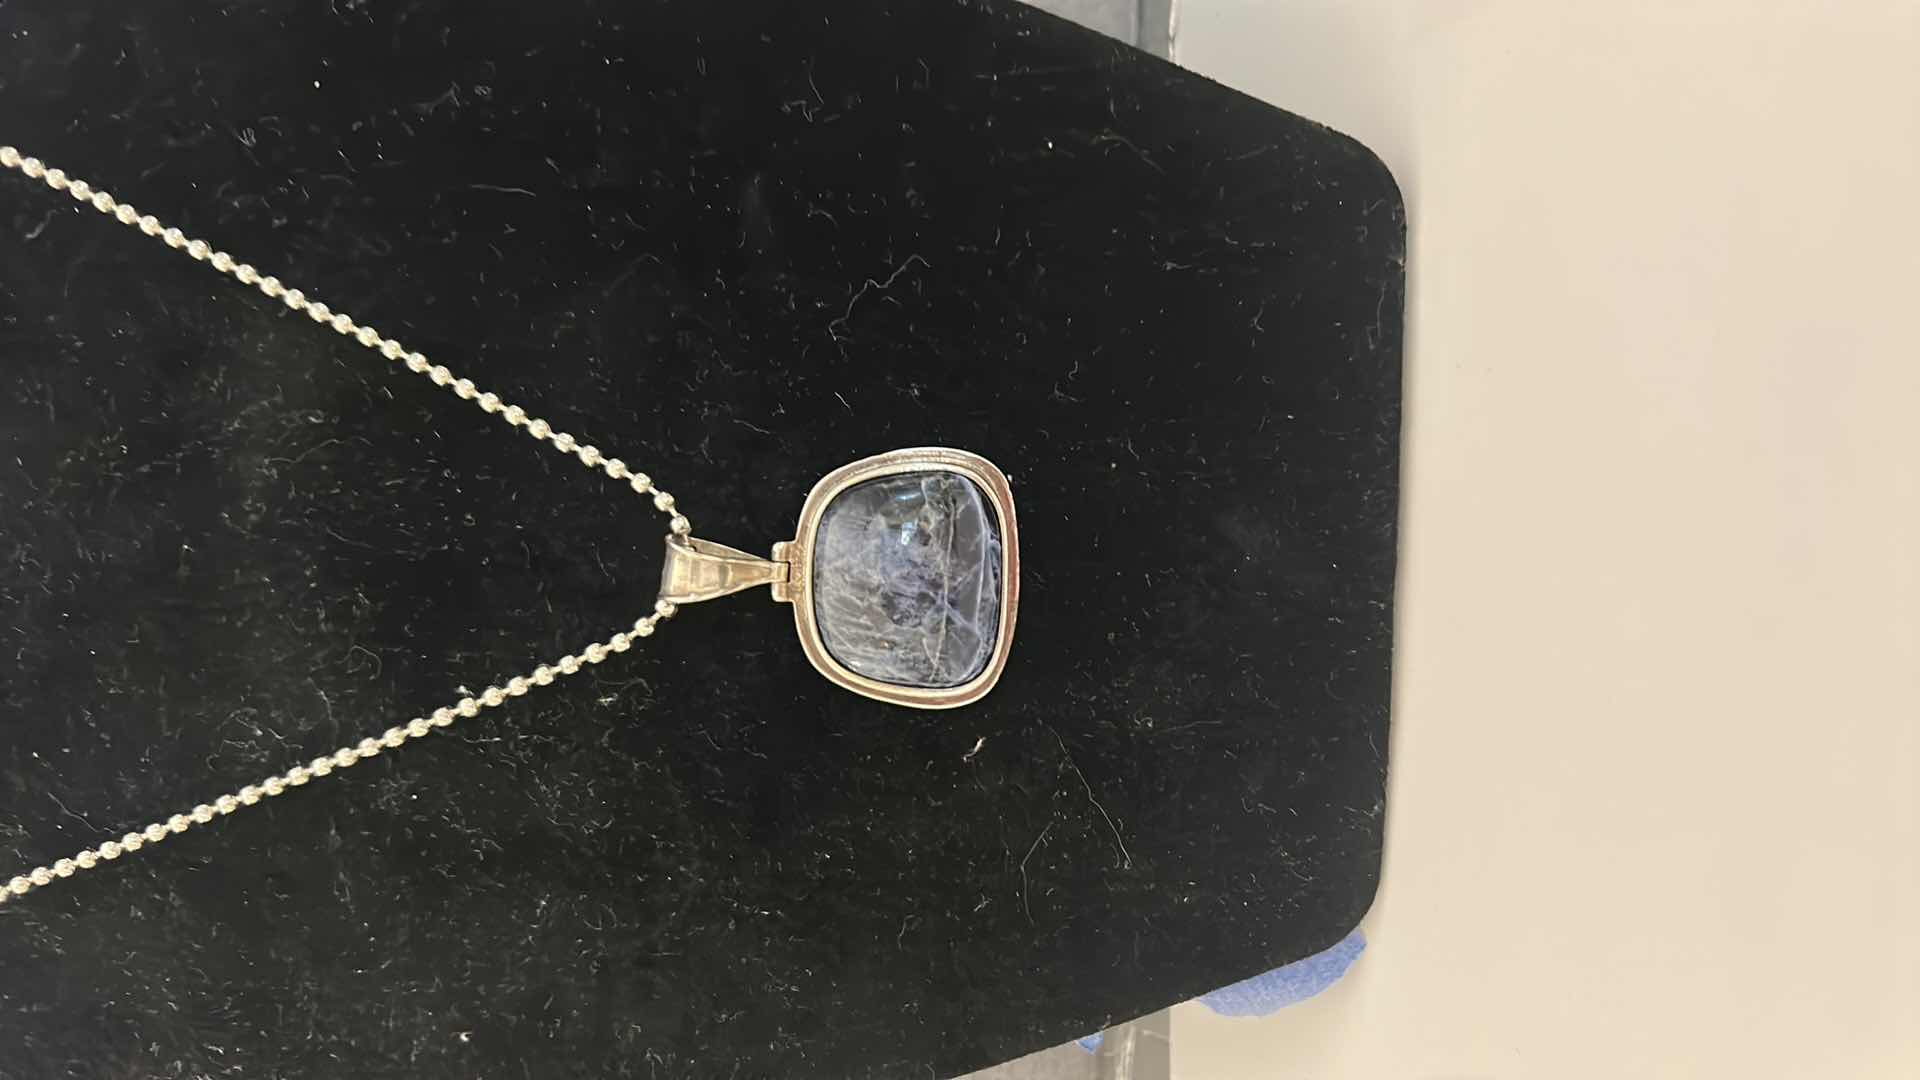 Photo 2 of FINE JEWELRY- .925 STERLING SILVER SILPADA PENDANT (1.25”) WITH DEEP BLUE SODALITE STONE AND CHAIN